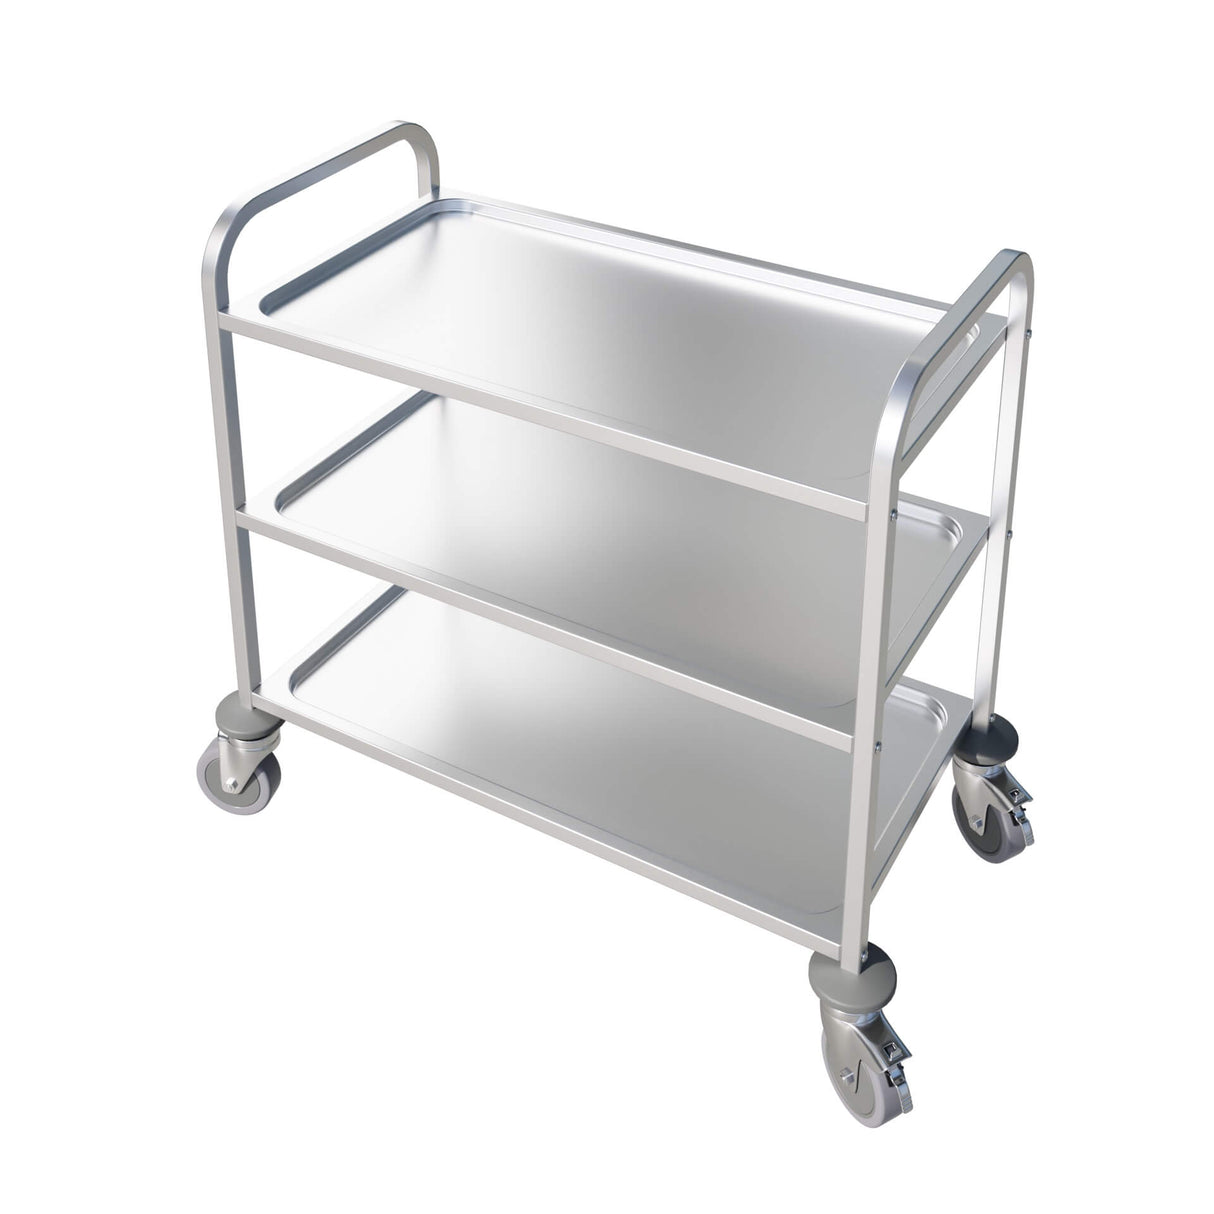 Empire Stainless Steel Large 3 Tier Dining Trolley - SSDT-3T Stainless Steel Dining Trolley Empire   